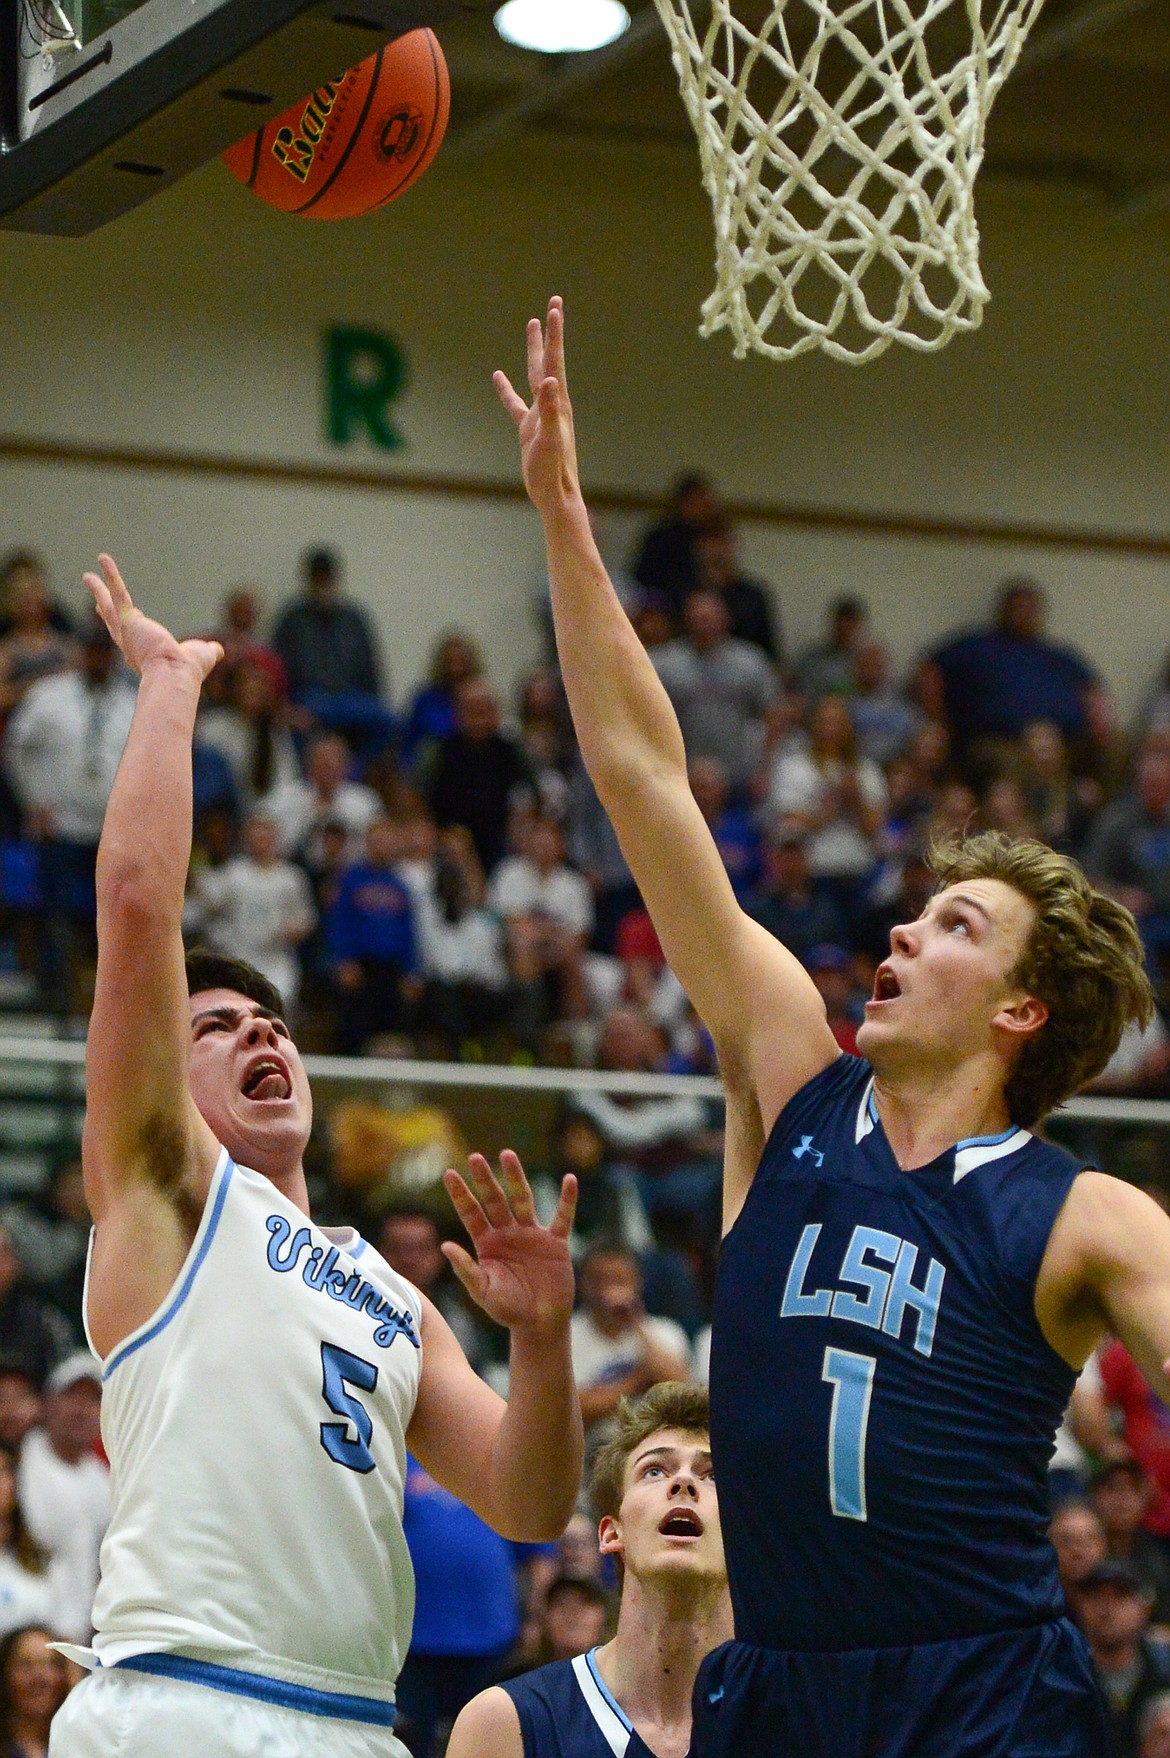 Bigfork's Luke Schmit (5) drives to the hoop with Loyola Sacred Heart's Jack Lincoln (1) defending in the State Class B boys' basketball championship at the Belgrade Special Events Center in Belgrade on Friday. (Casey Kreider/Daily Inter Lake)